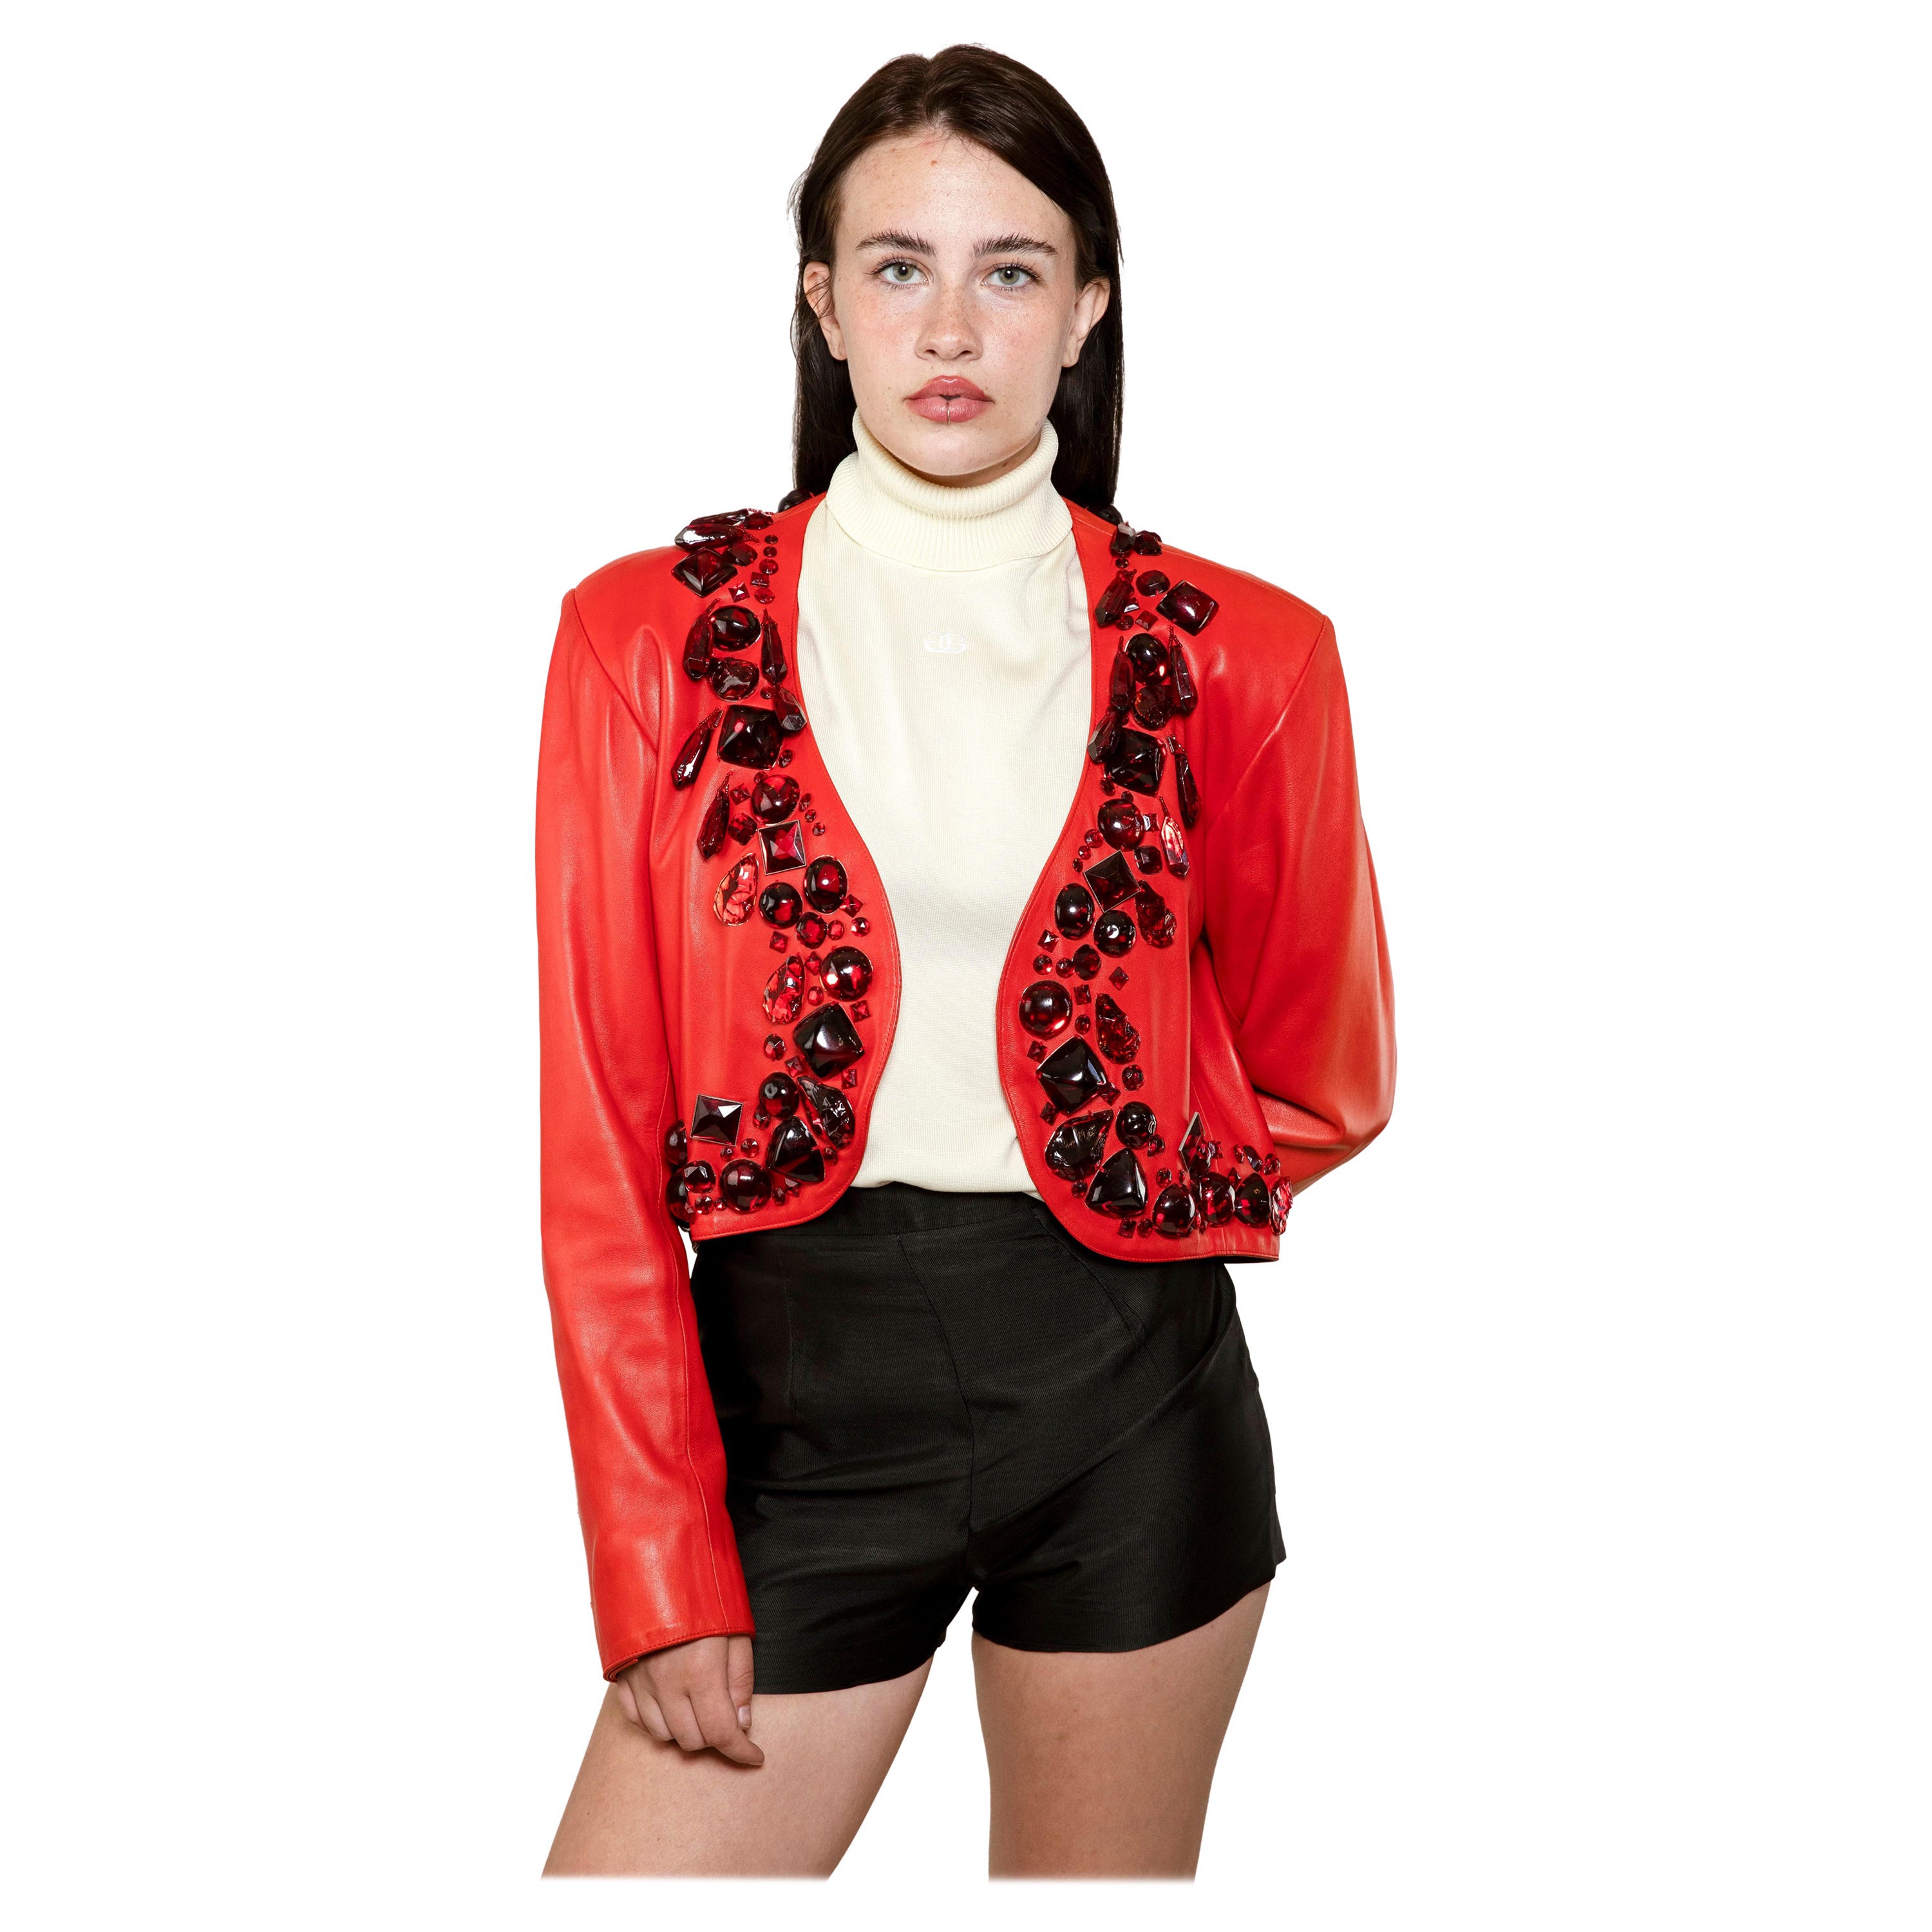 Yves Saint Laurent 1990 Glass Bead Leather Cropped Jacket For Sale